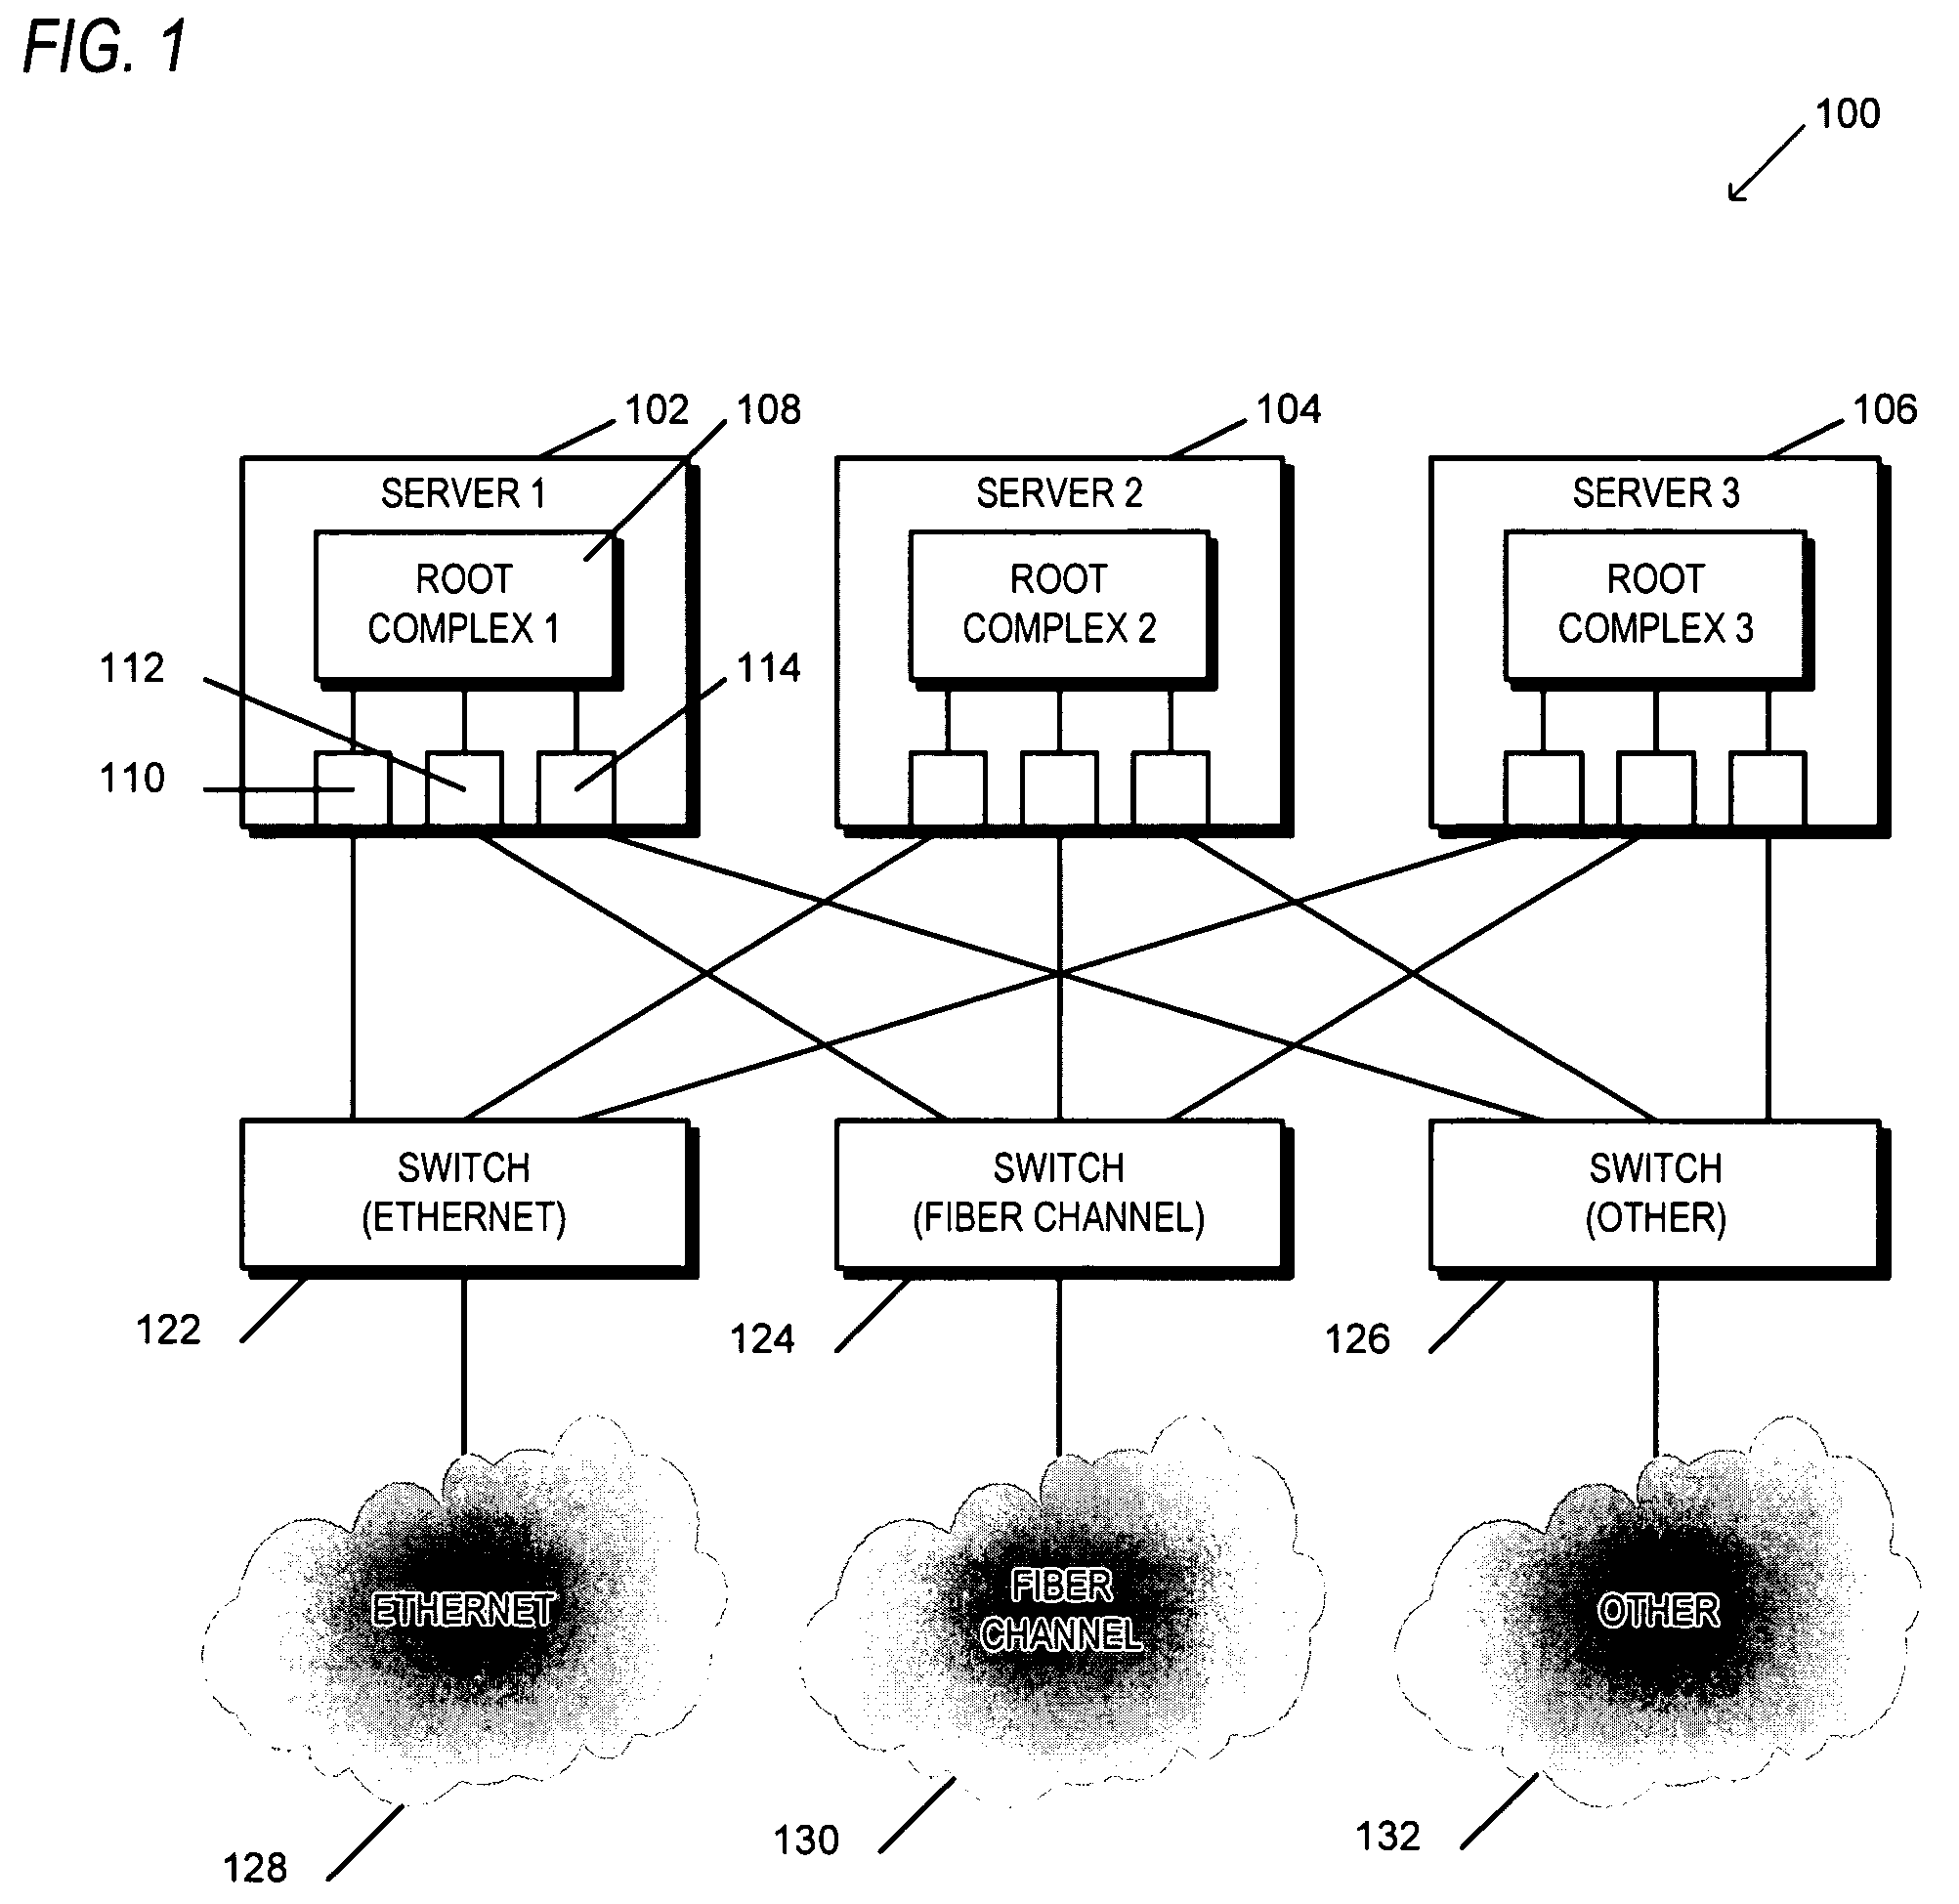 Switching apparatus and method for providing shared I/O within a load-store fabric